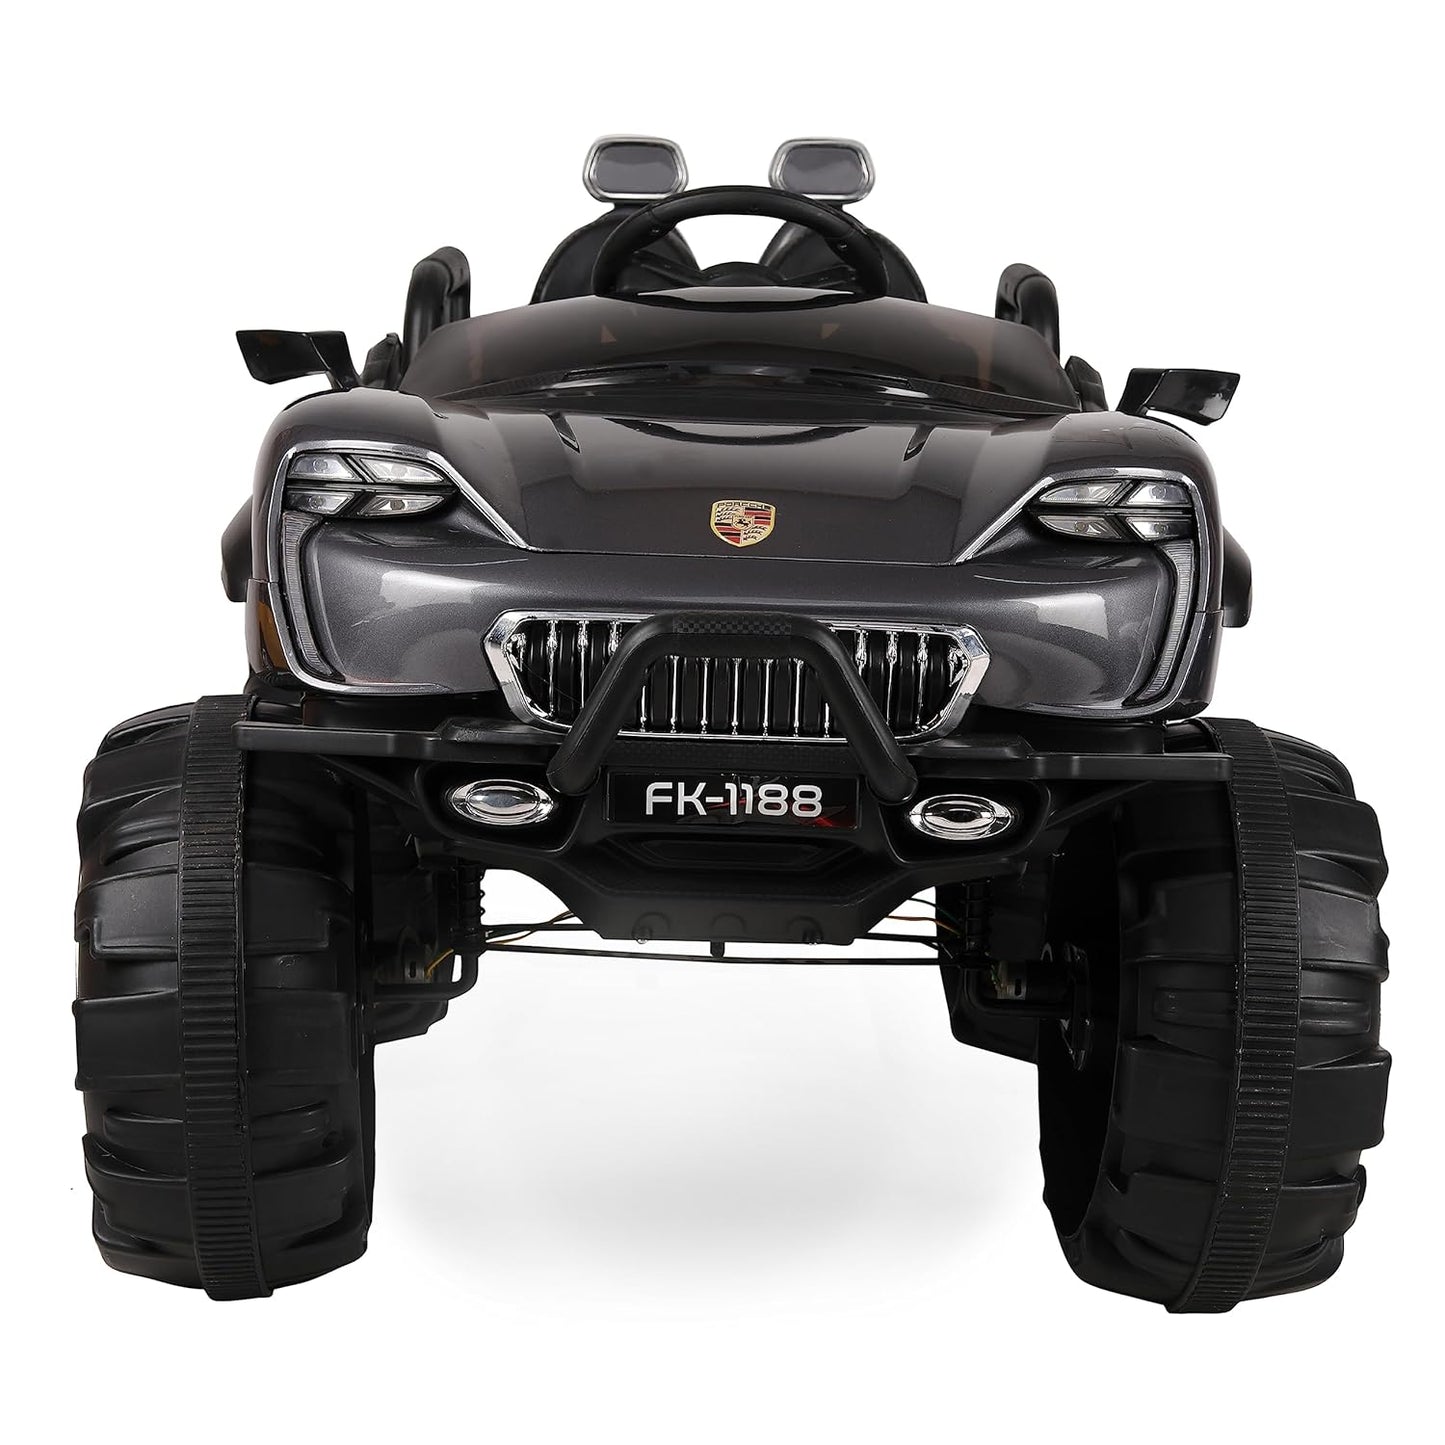 GettBoles 4X4 Electric Rechargeable Jeep for Kids of Age 2 to 7 Years- Battery Operated Car Jeep with Mic, M3 Player, Led Lights, Suspension and Bluetooth Remote (Grey)